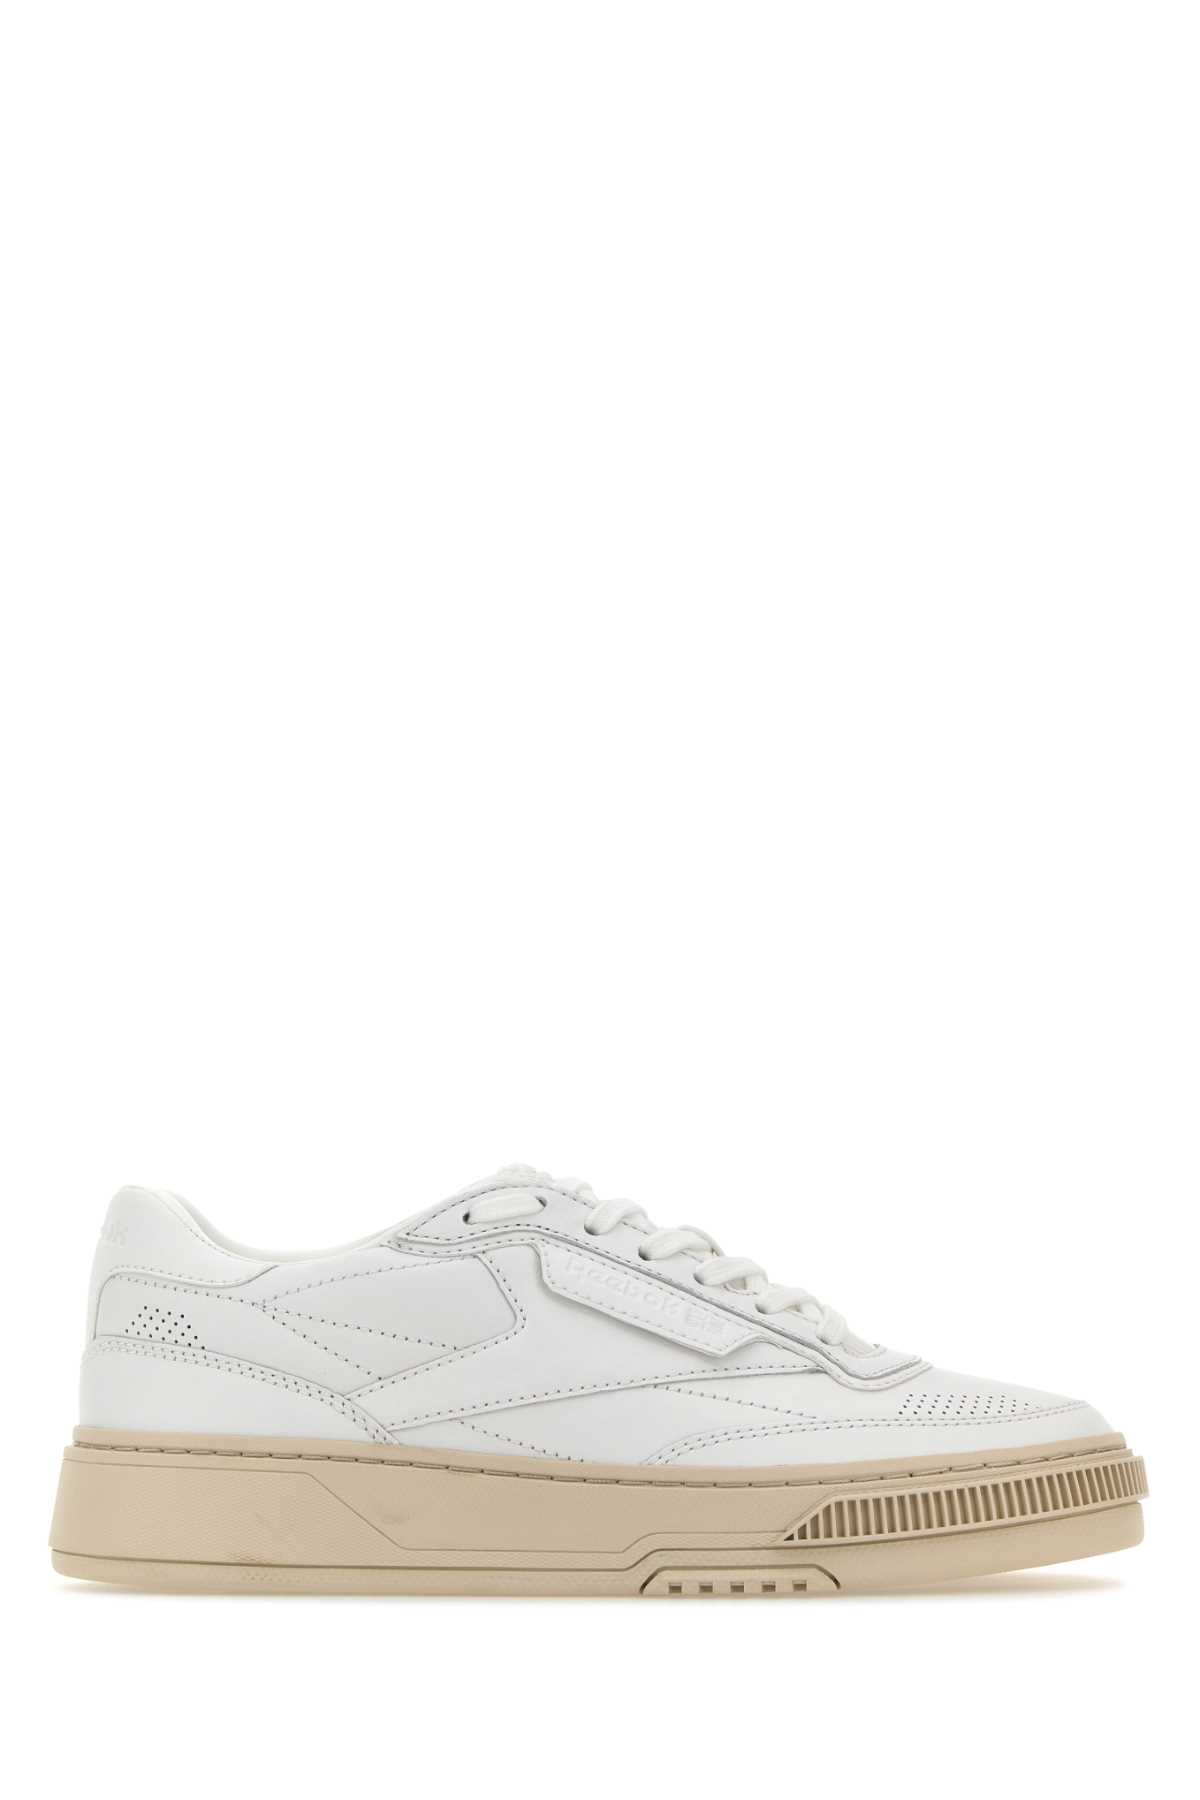 White Leather Club C Ltd Sneakers